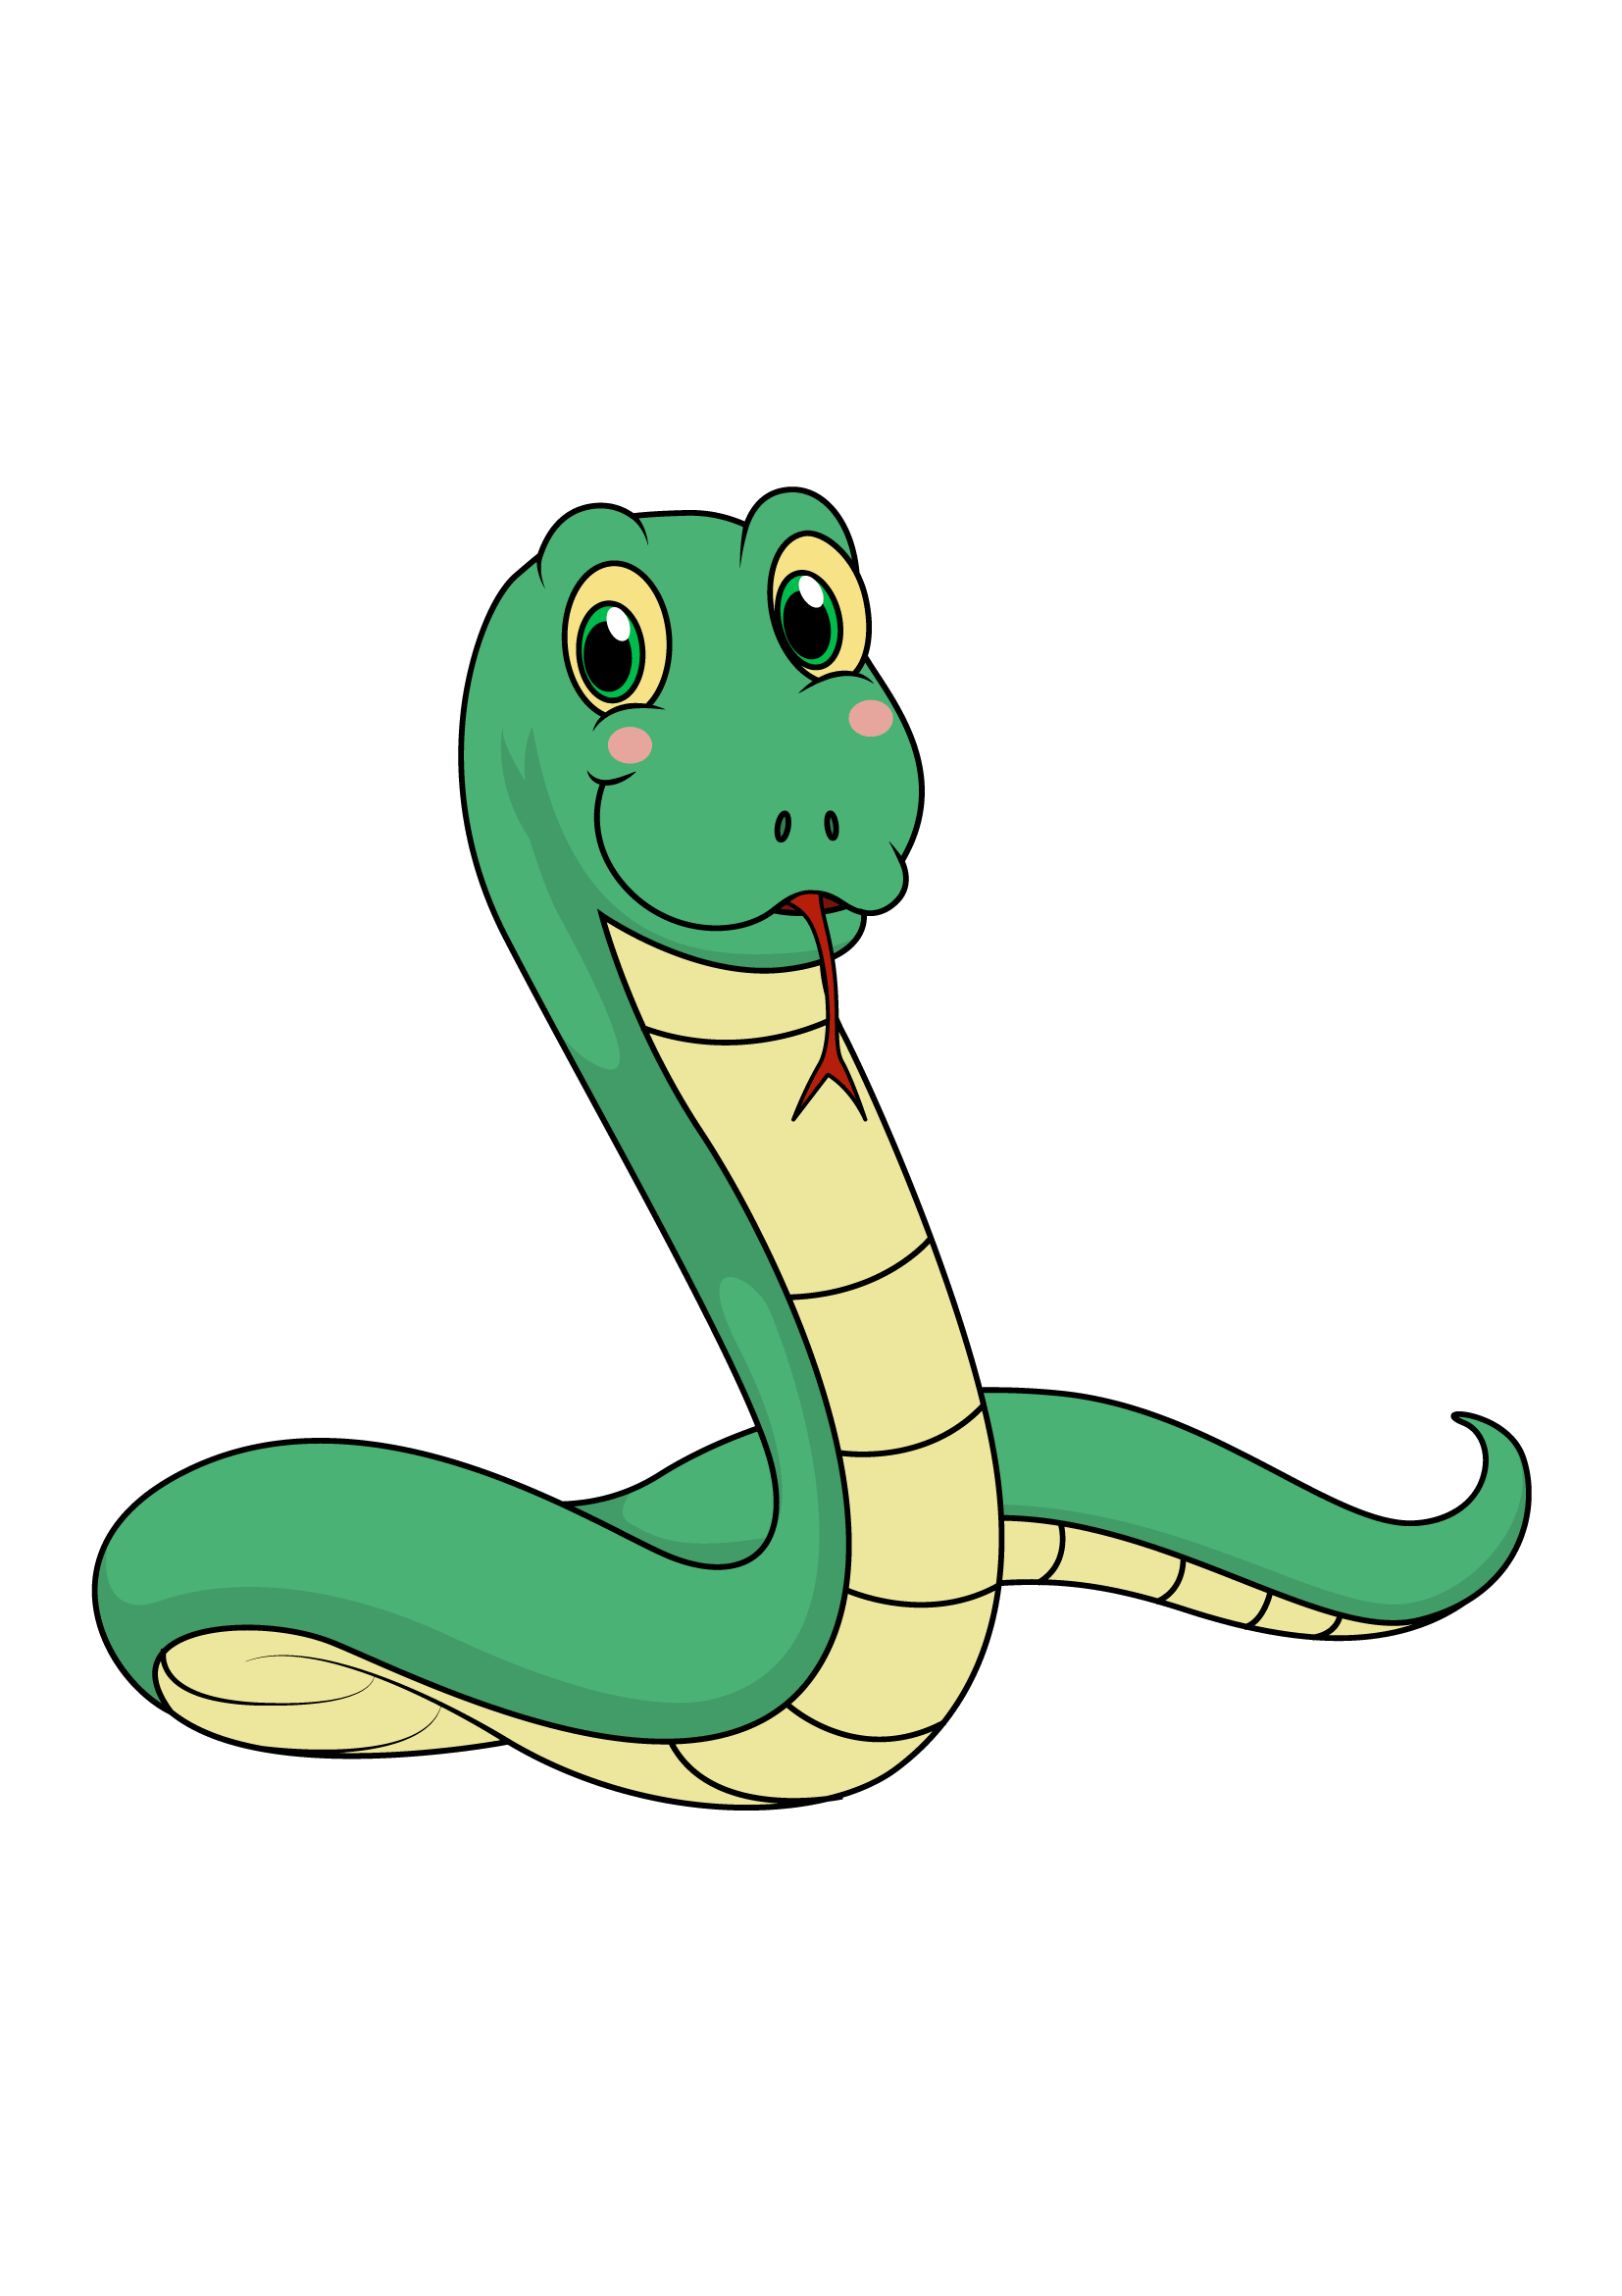 How to Draw A Cute Snake Step by Step Printable